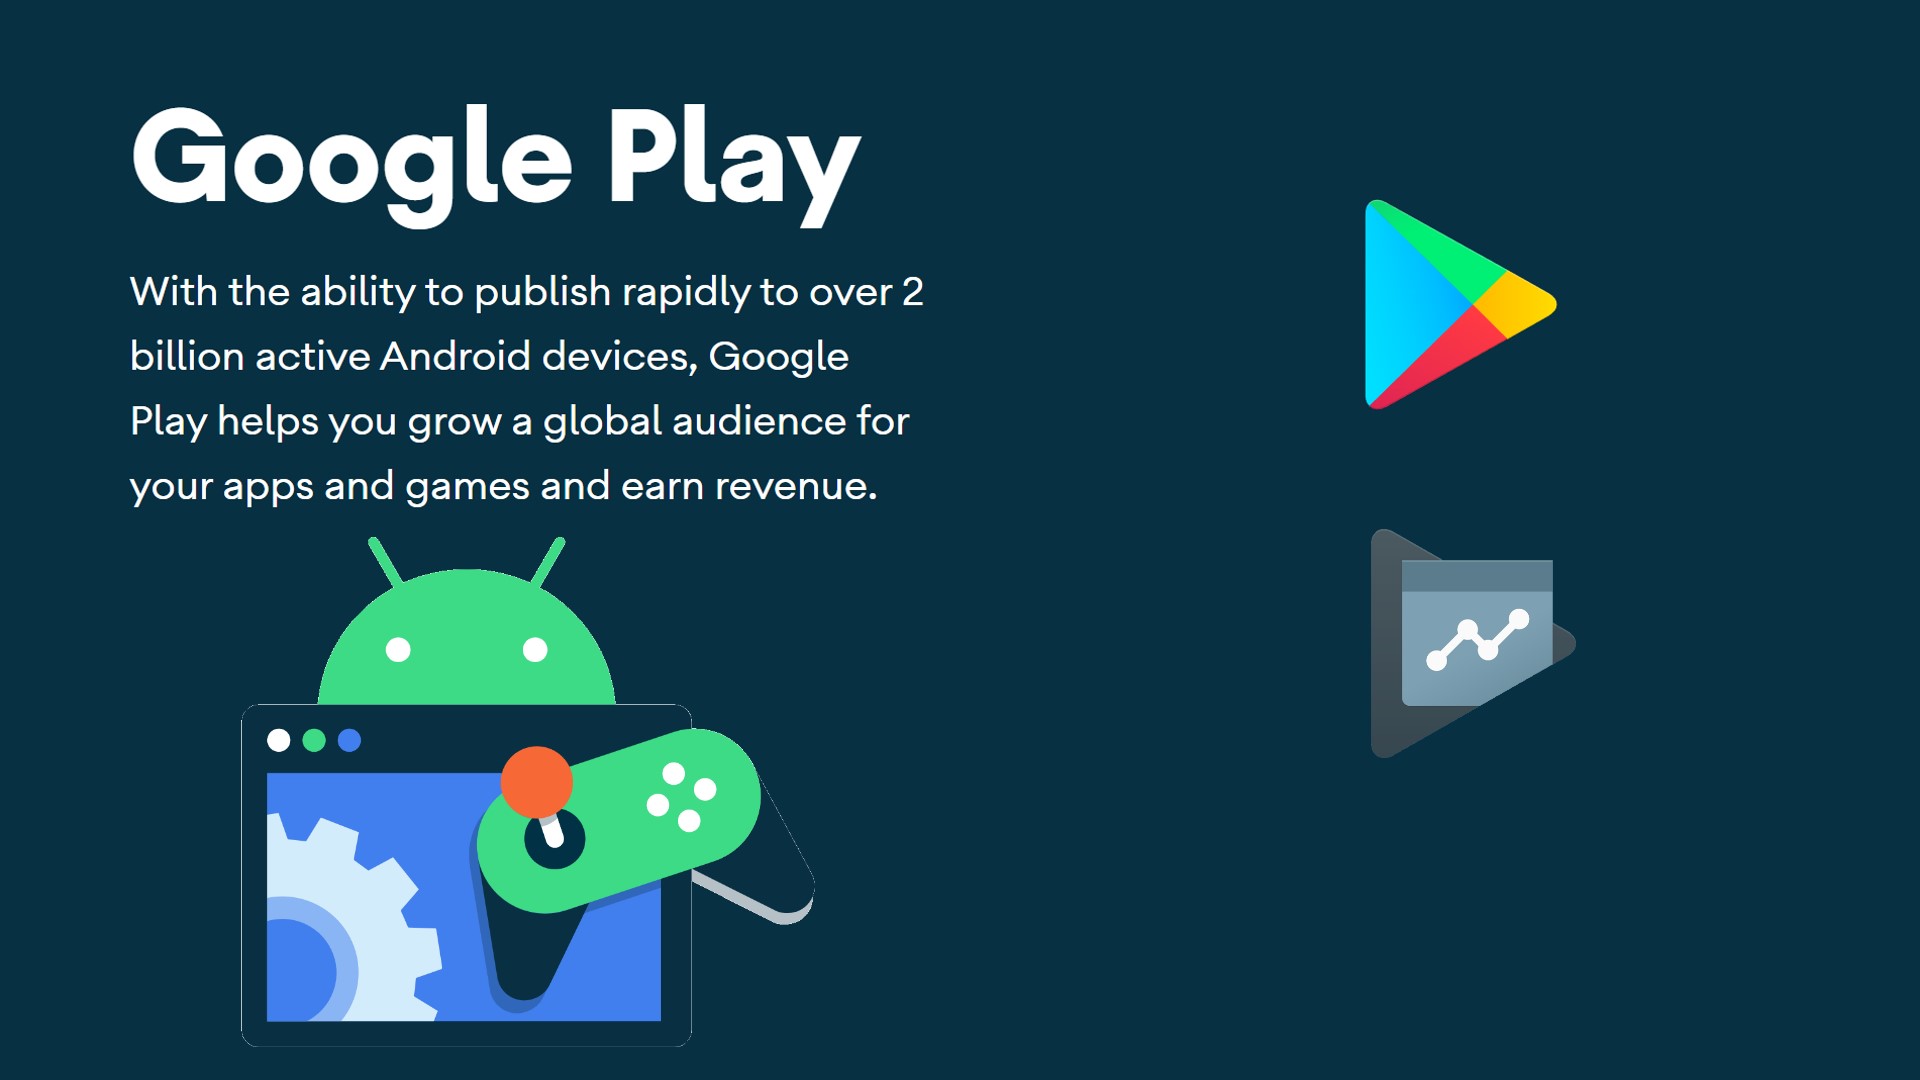 Developer Console - APK Download for Android